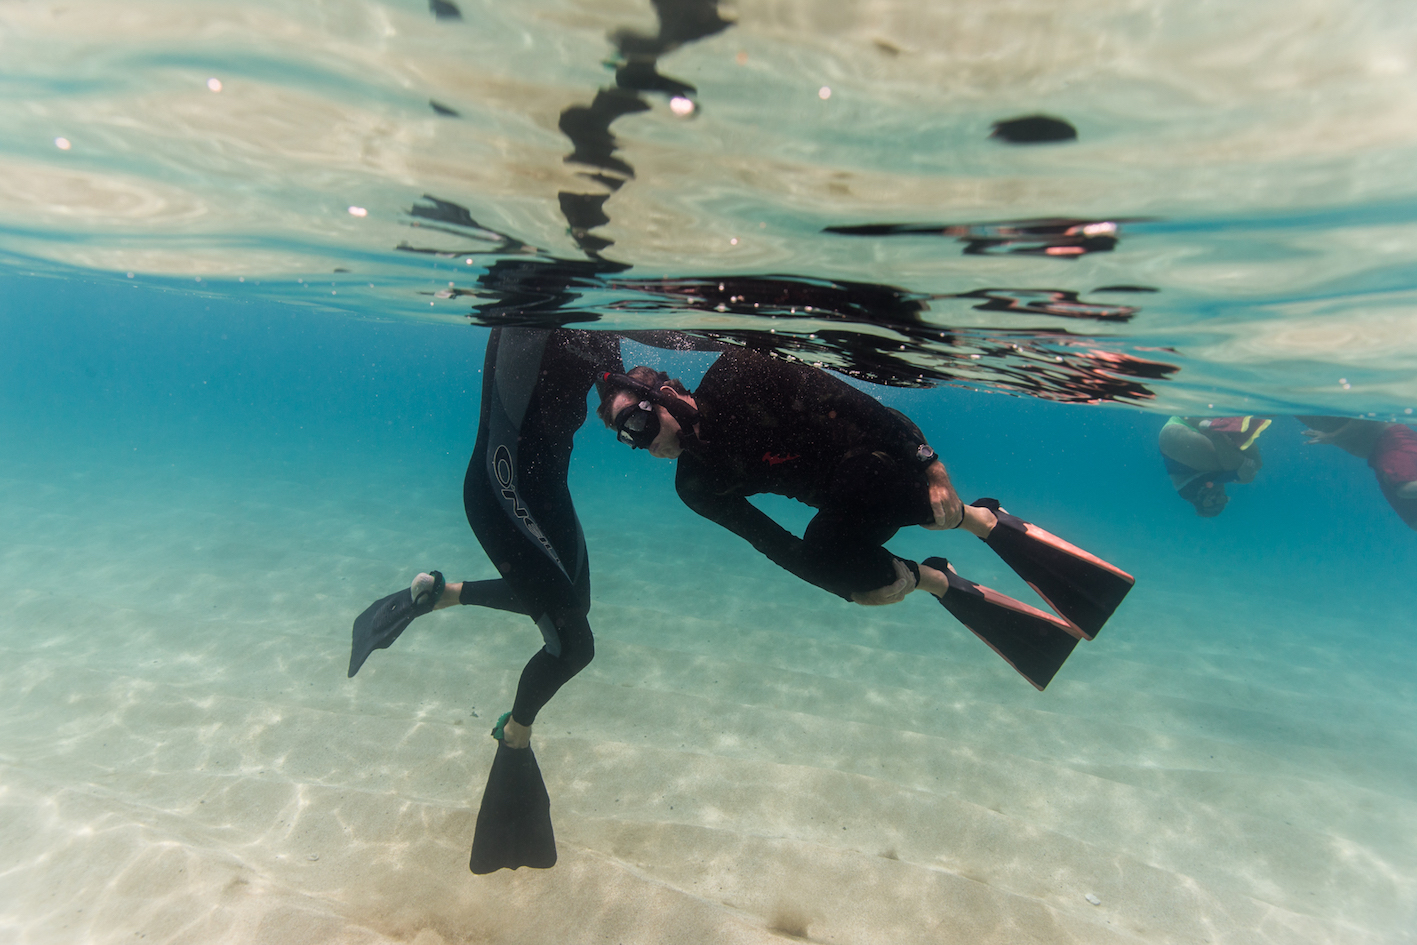 Two scuba divers practicing apnea and surf survival skills